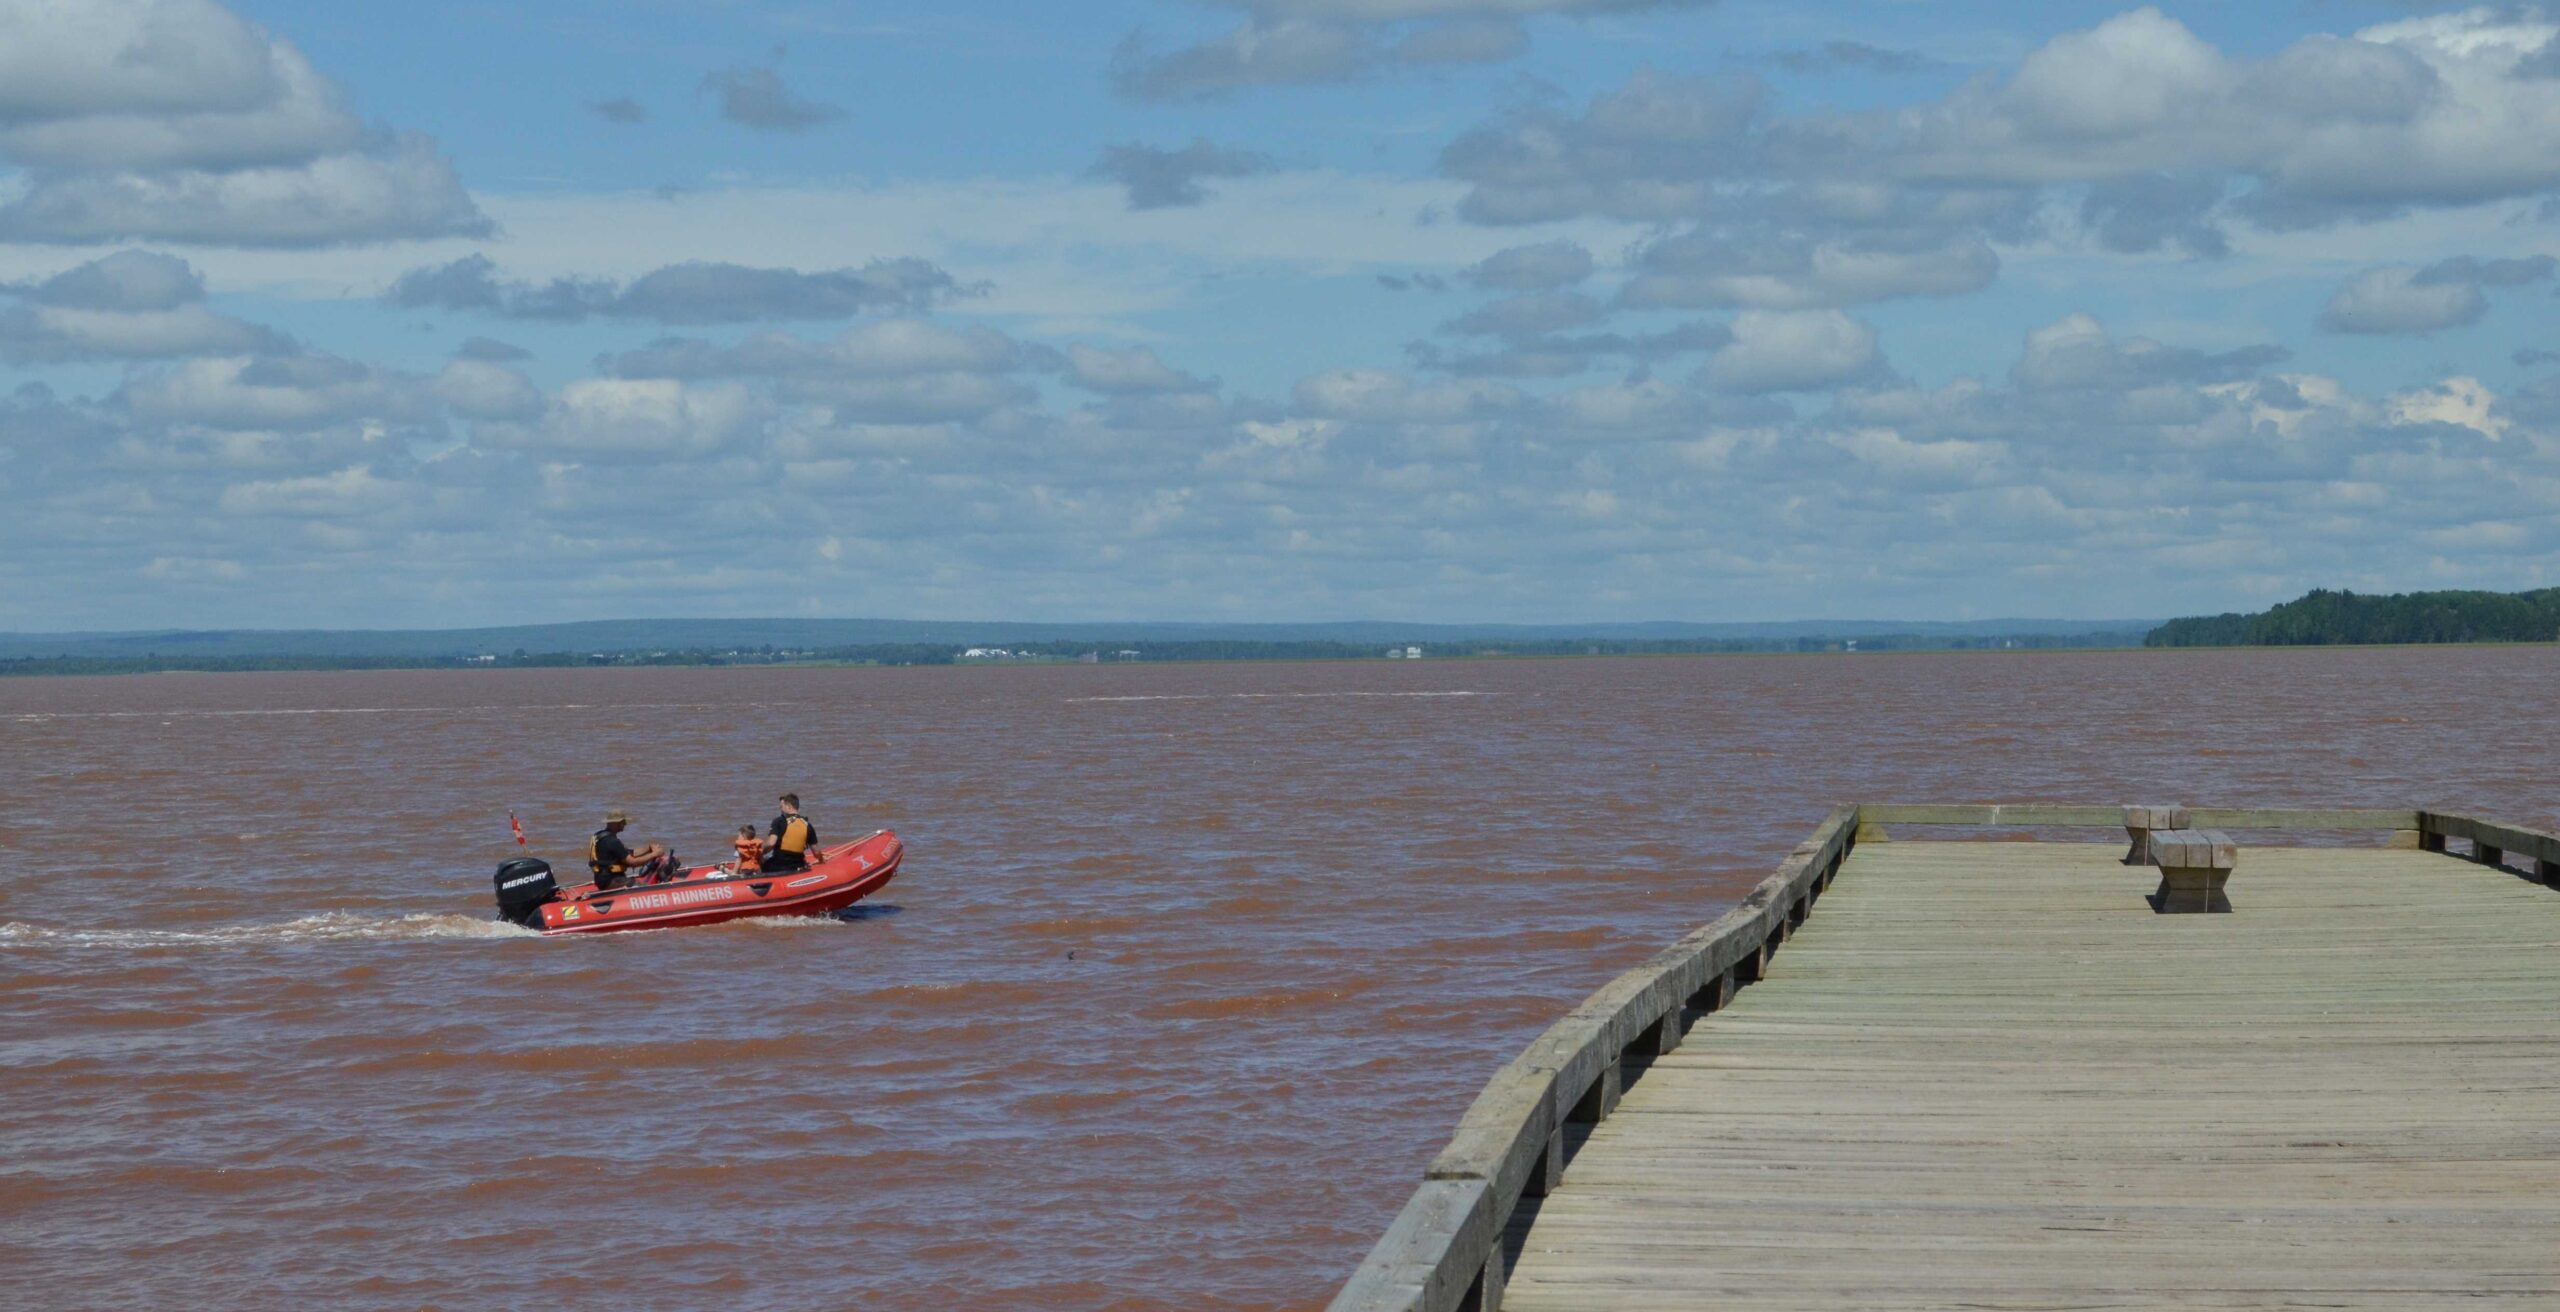 A red zodiac boat cruising across the water towards the end of a long wooden wharf